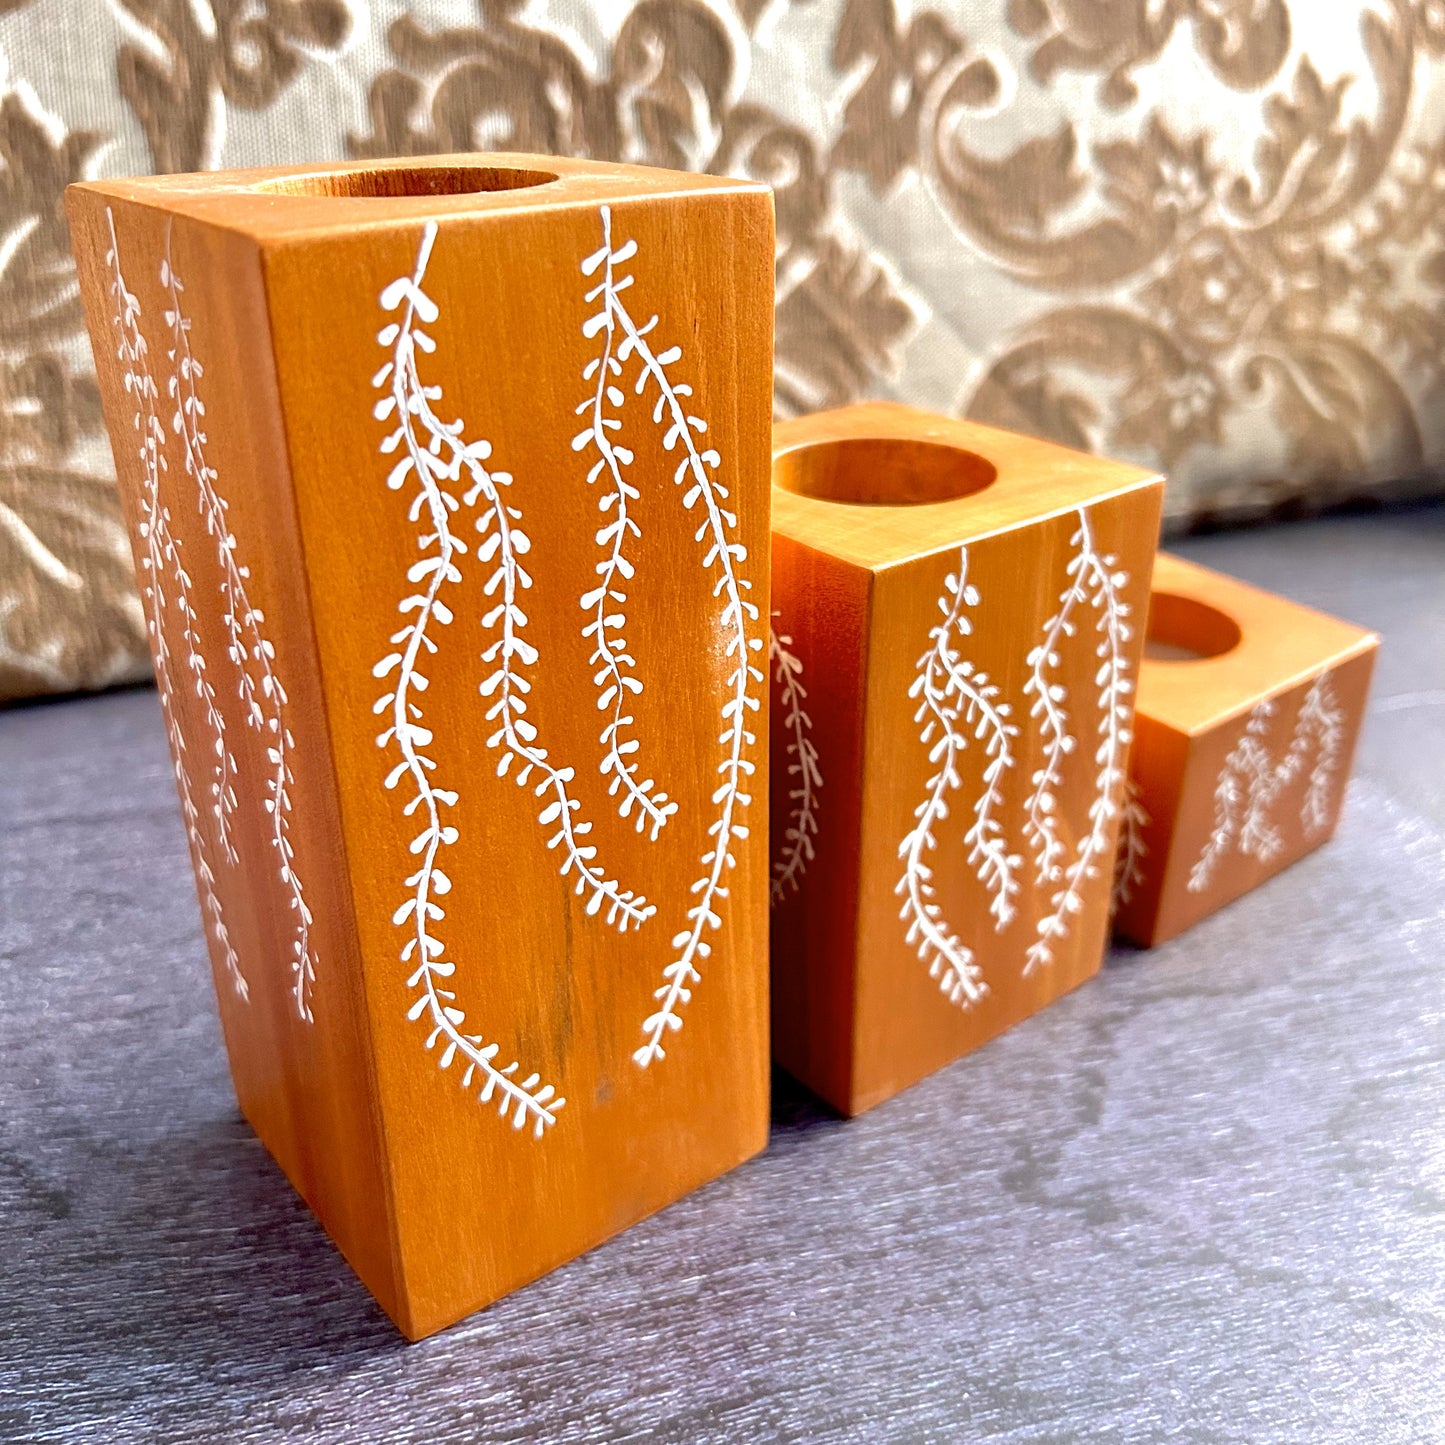 Handcrafted set of 3 candle holders made of Natural solid mahogany wood is a perfect way to make your rooms cozy and beautiful. Hand-drawn with beautiful motifs when placed on a coffee/dining/corner table, accents the beauty,  brightens the space making the room welcoming, calm and peaceful. These candle holders of different heights could be arranged in any way as per the space it is kept. 